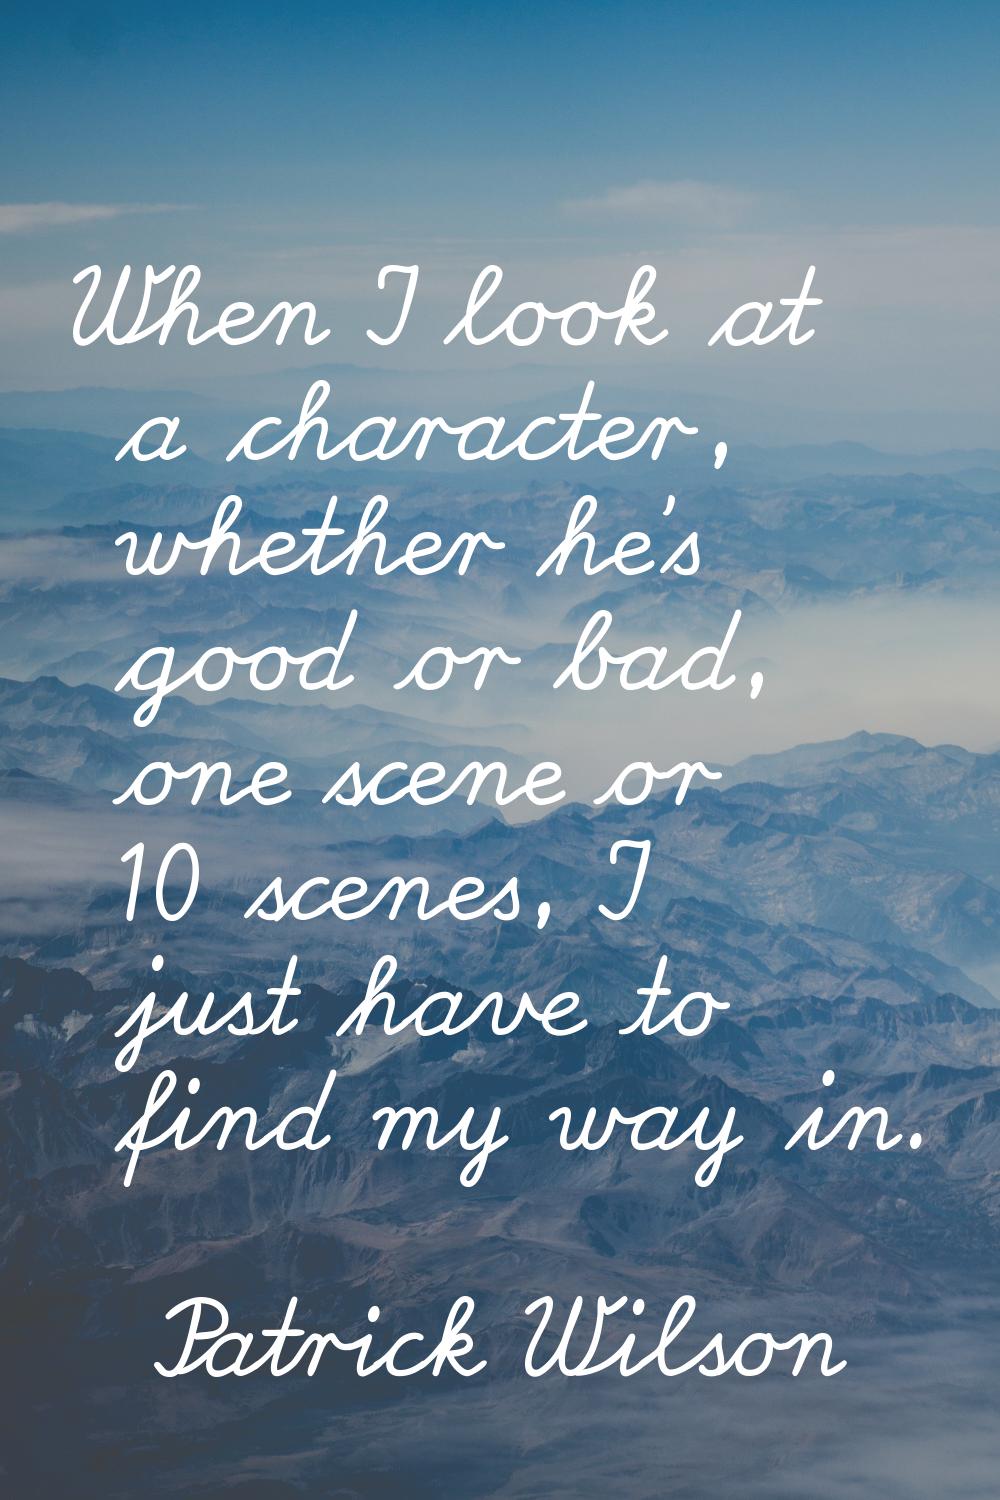 When I look at a character, whether he's good or bad, one scene or 10 scenes, I just have to find m